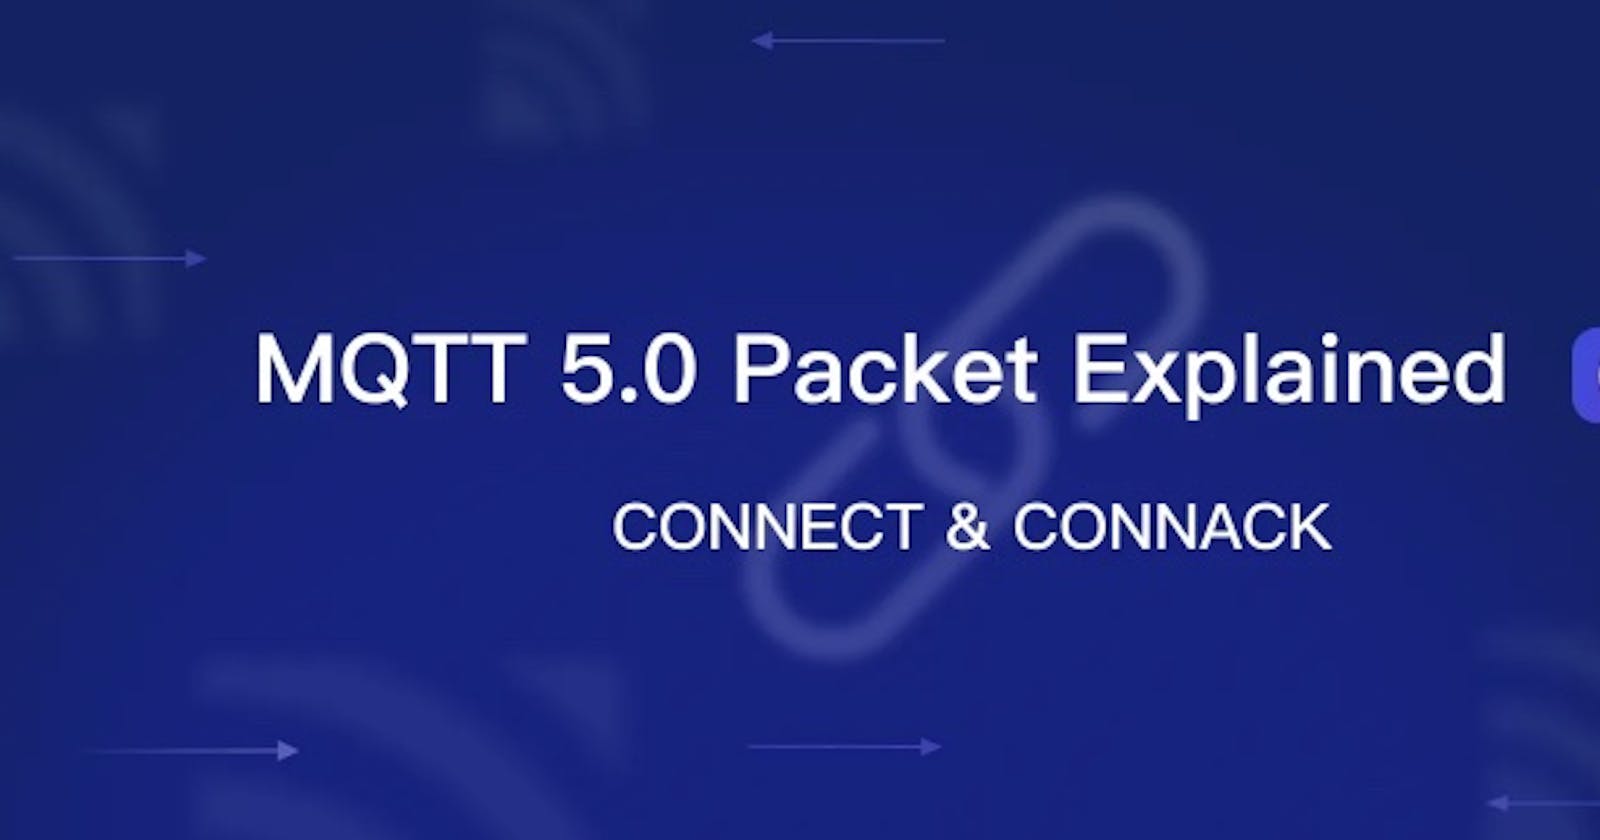 MQTT 5.0 Packet Explained 01: CONNECT & CONNACK